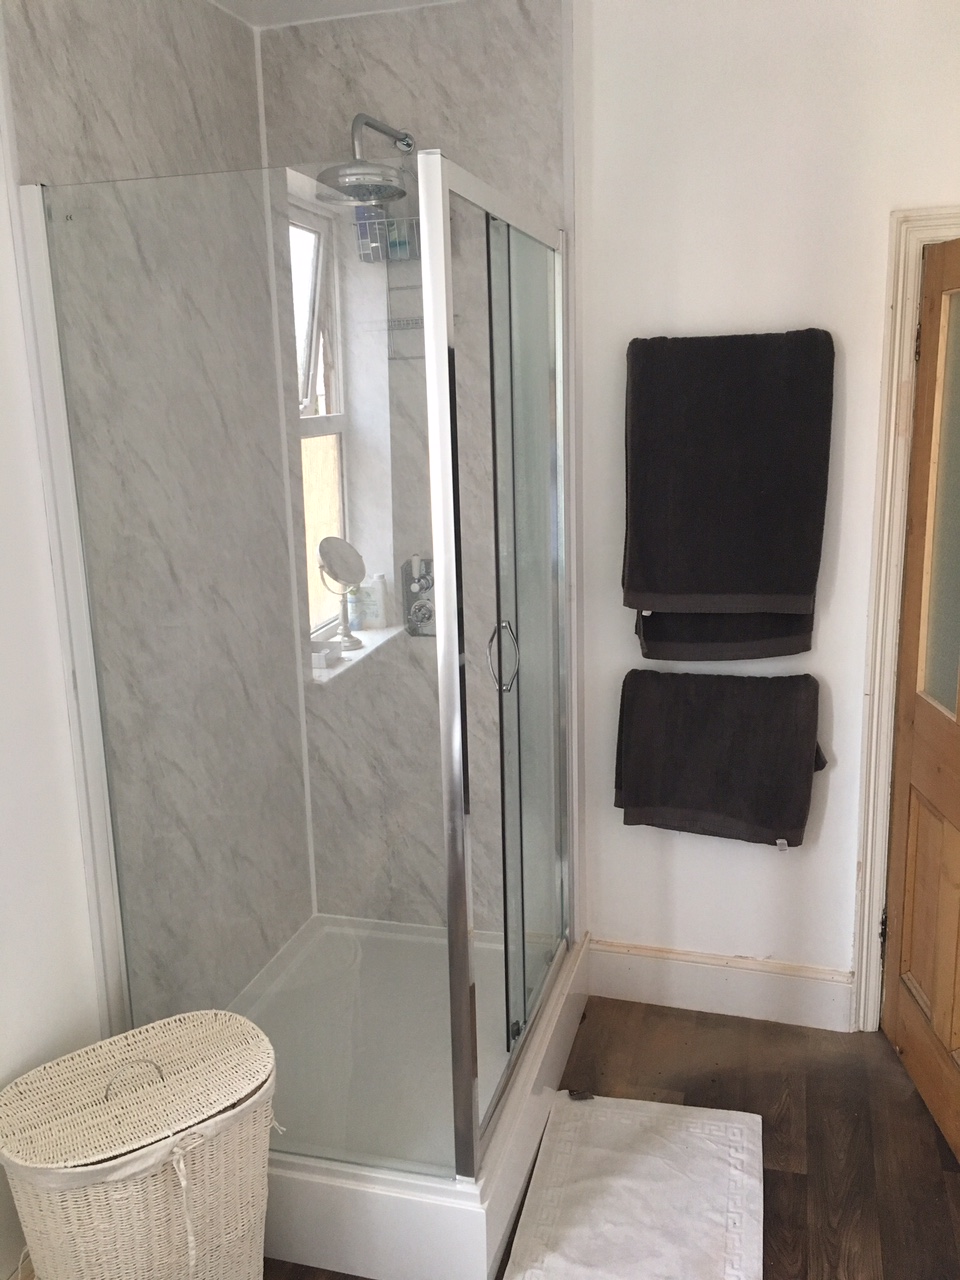 shower cubicle and panels installed